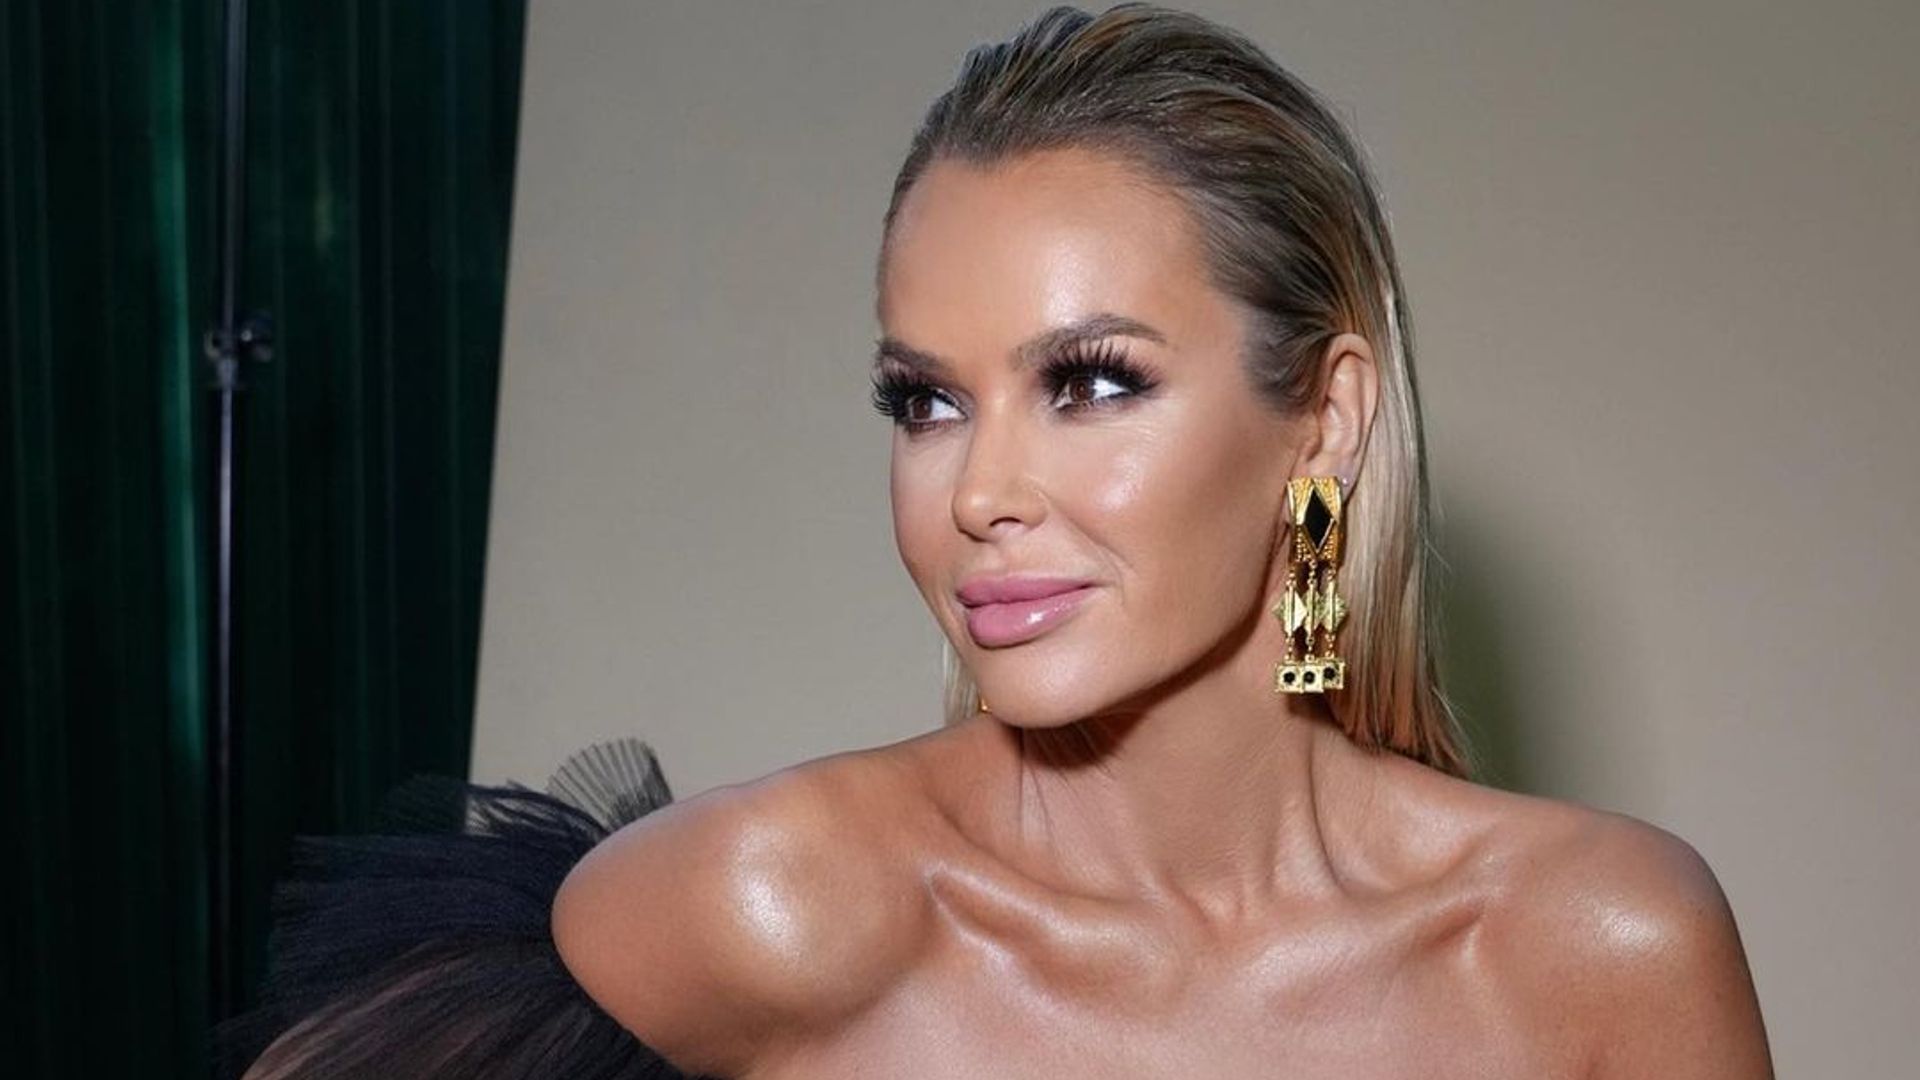 Amanda Holden - Amanda Holden almost bares all in naked 'birthday suit' photo | HELLO!